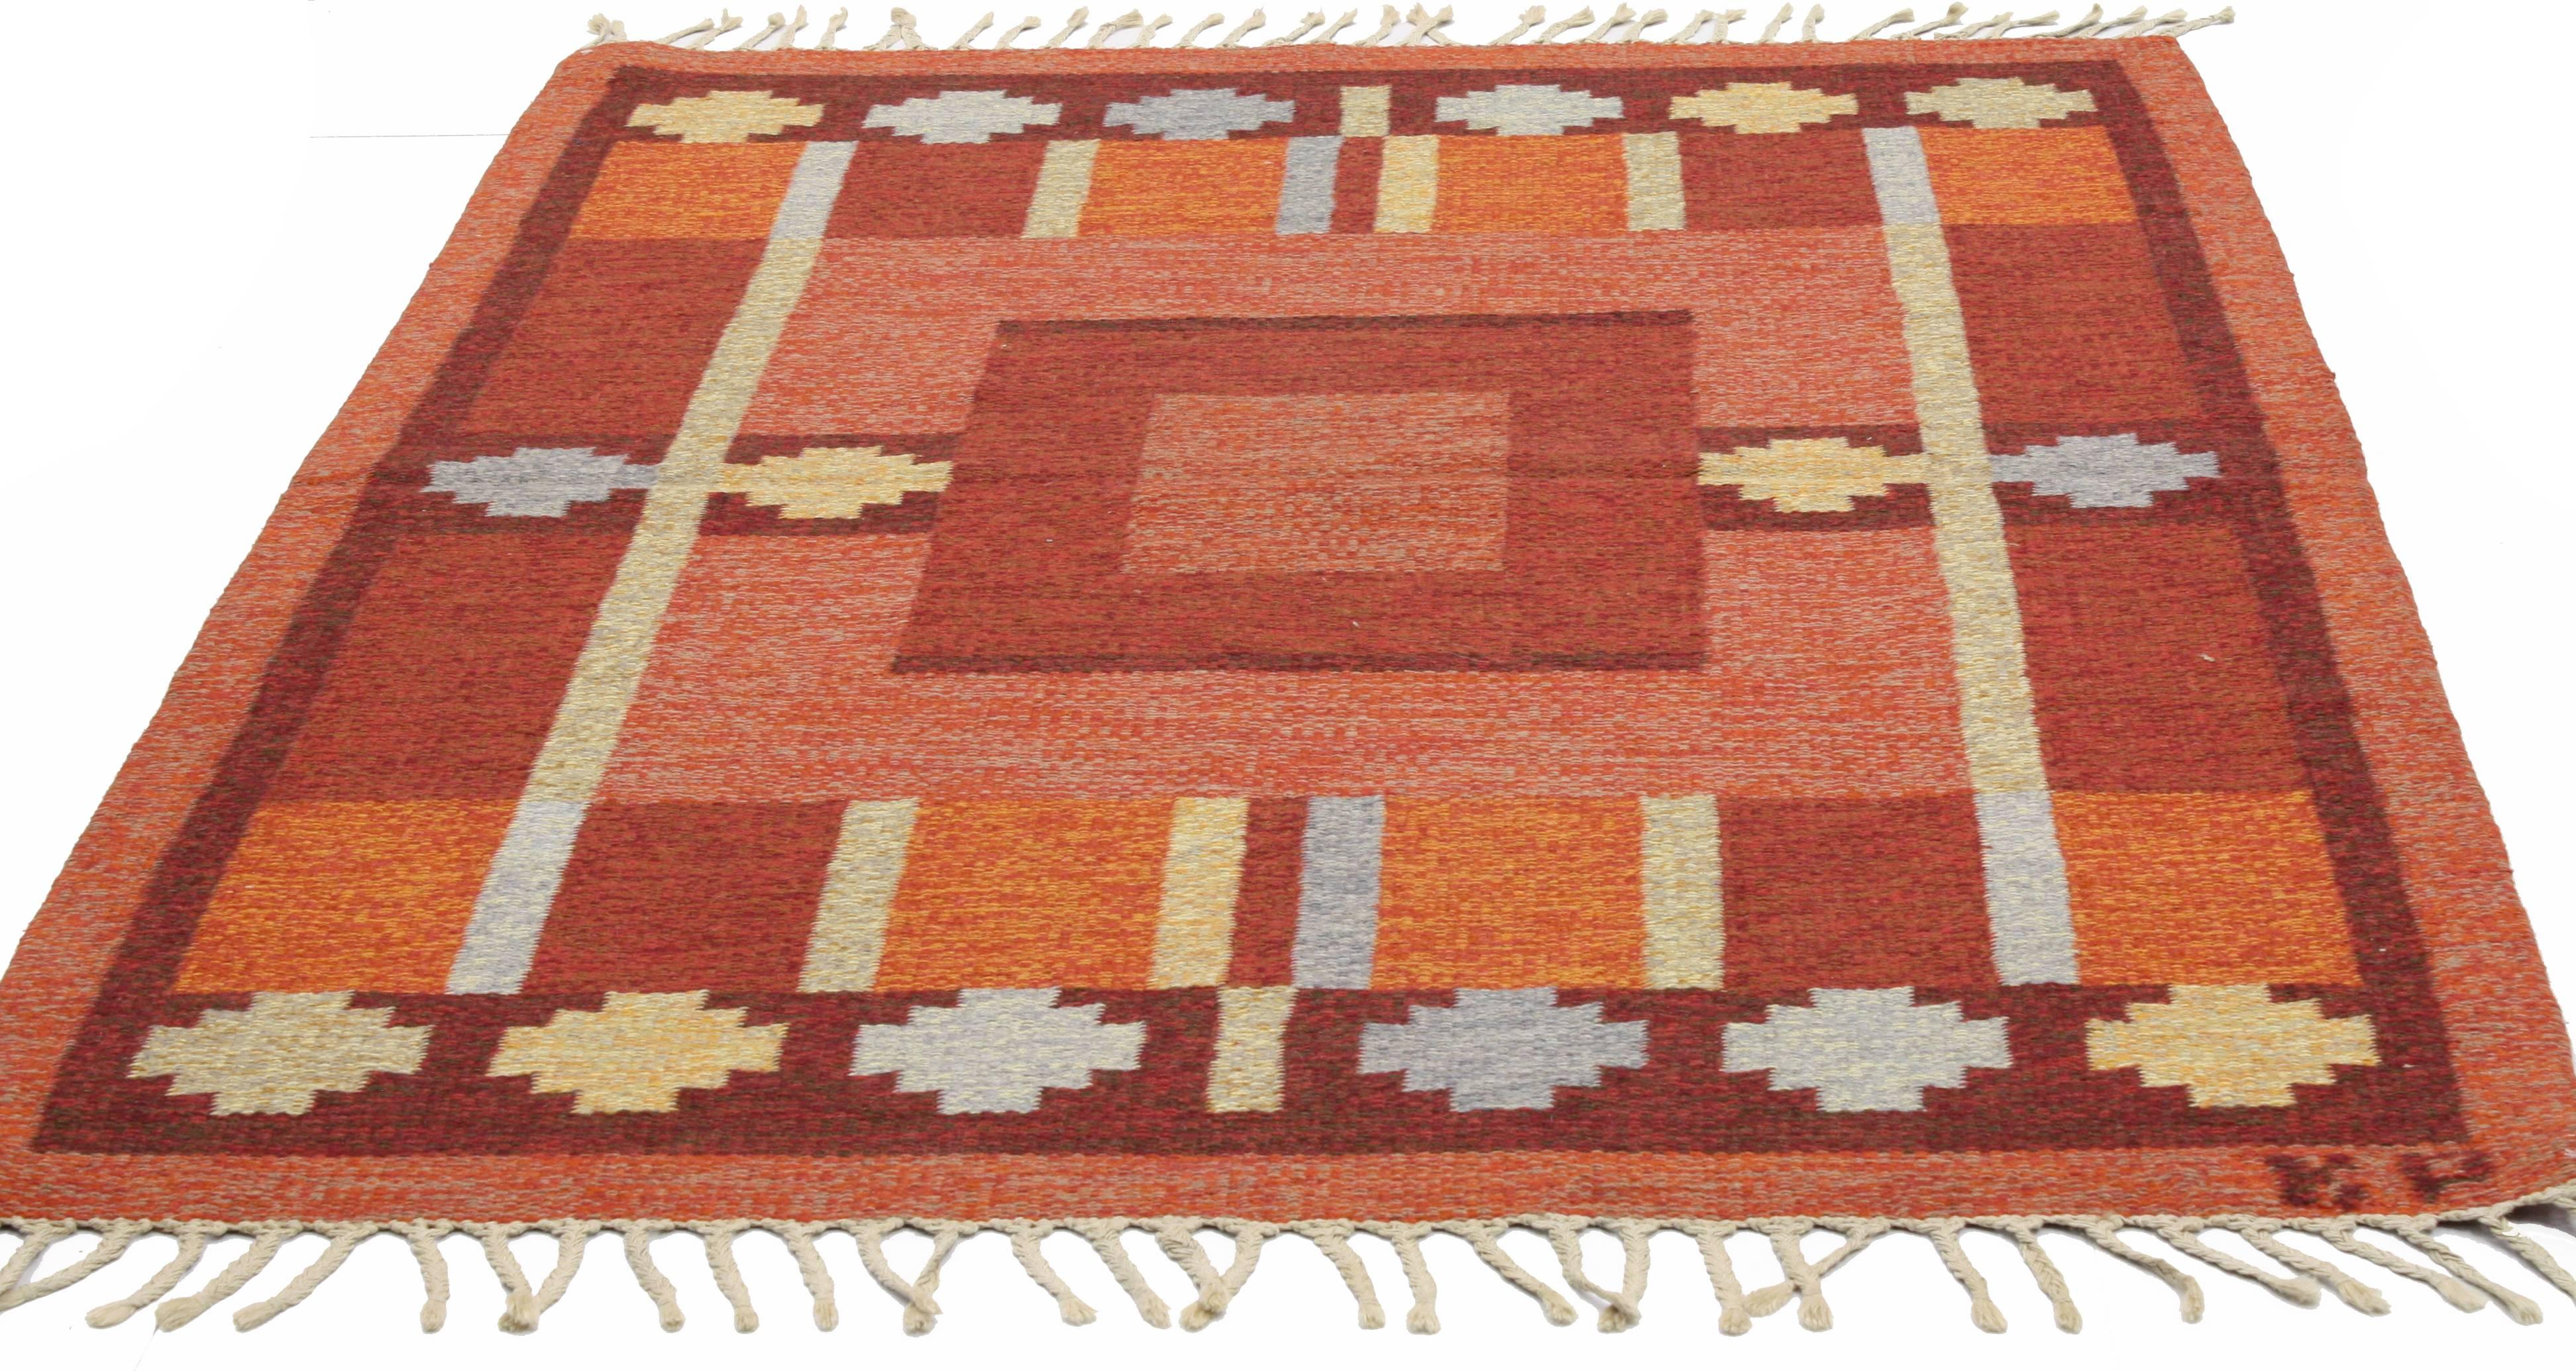 Vintage Swedish Kilim Rug with Scandinavian Modern Style by Kerstin Persson  In Good Condition For Sale In Dallas, TX